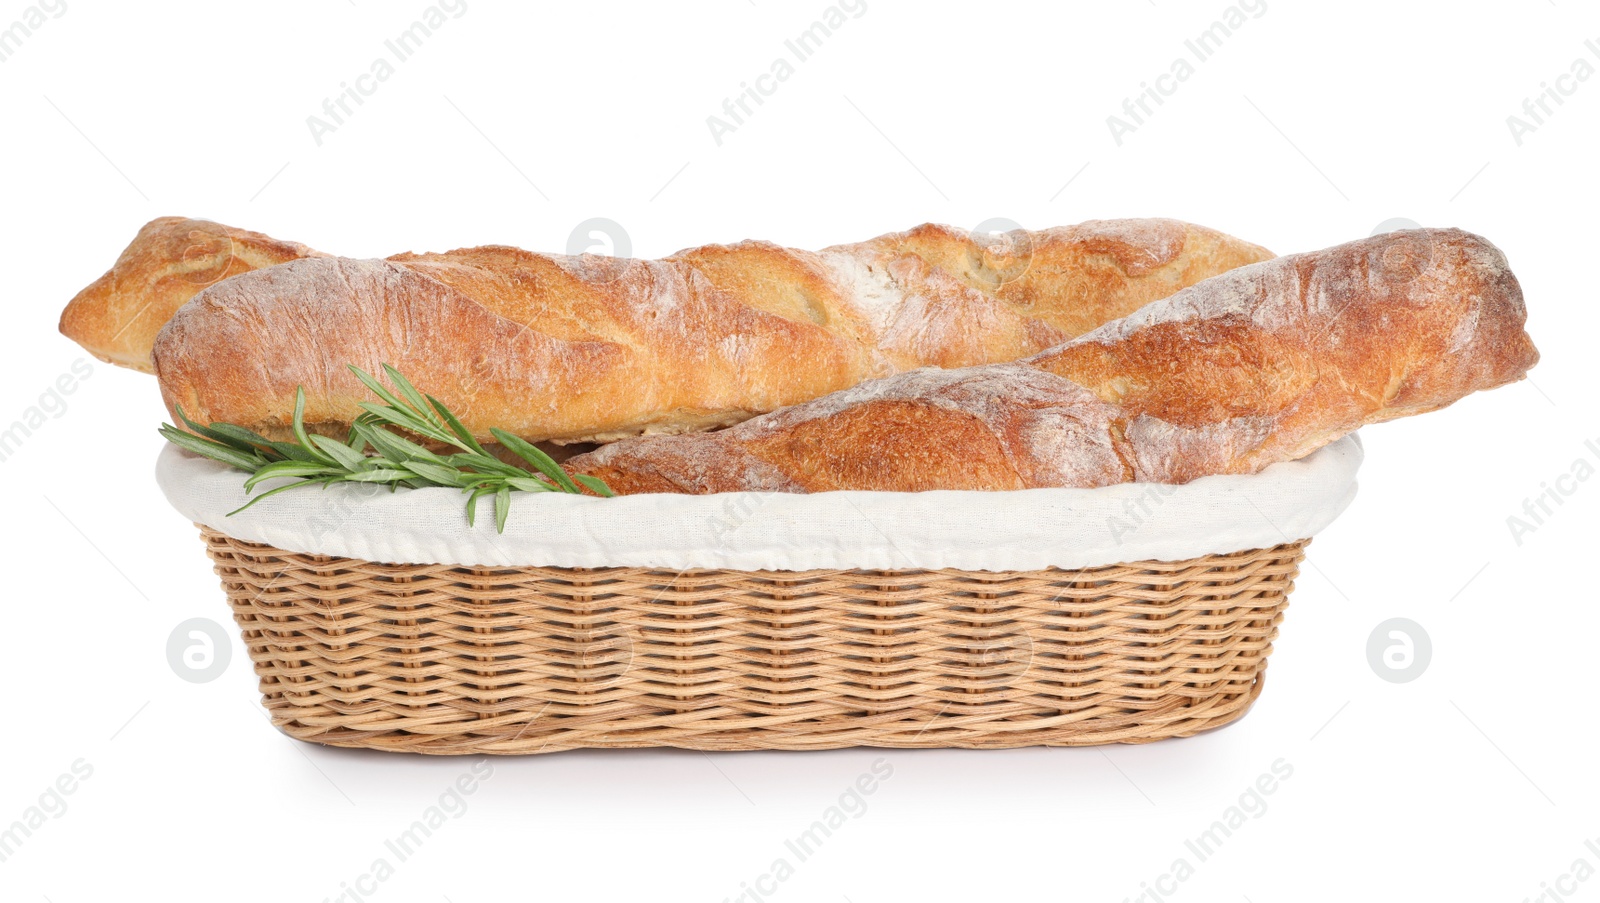 Photo of Crispy French baguettes with rosemary in wicker basket on white background. Fresh bread